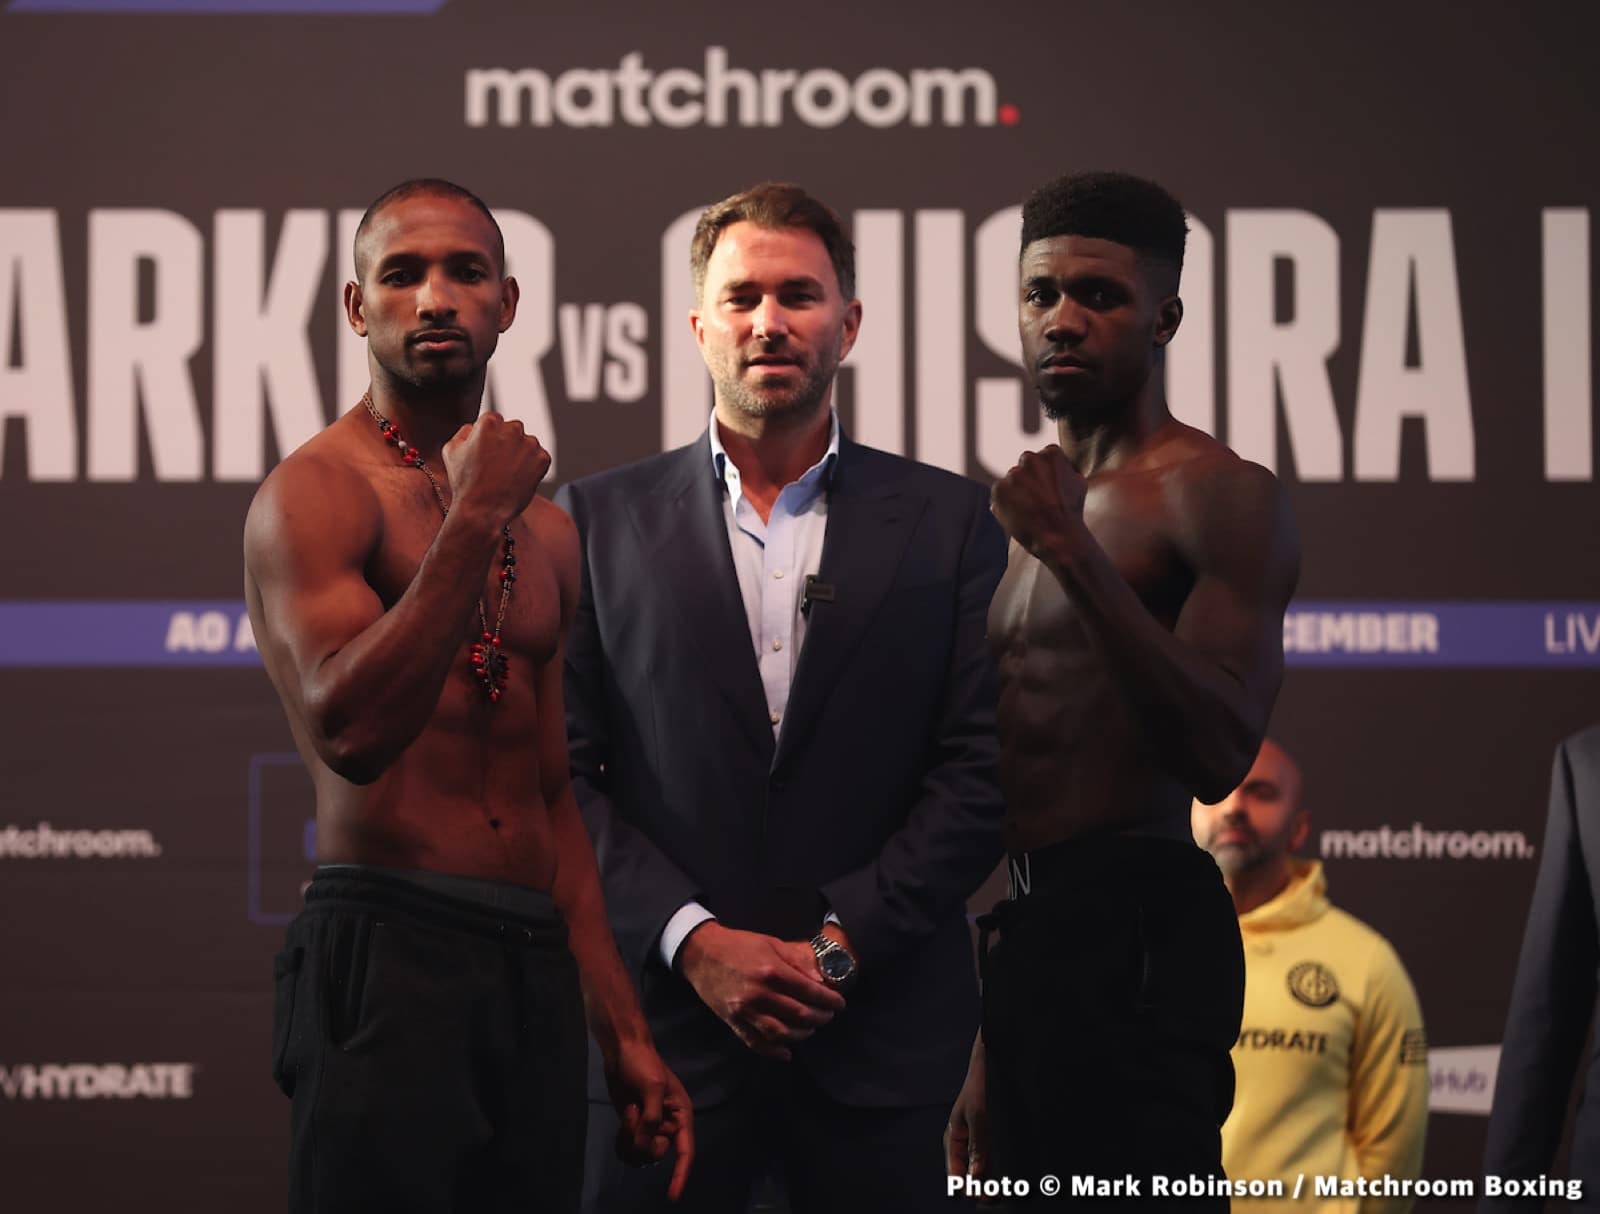 Image: Joseph Parker bulks up to 251, Dereck Chisora 248 1/2 - weigh-in results